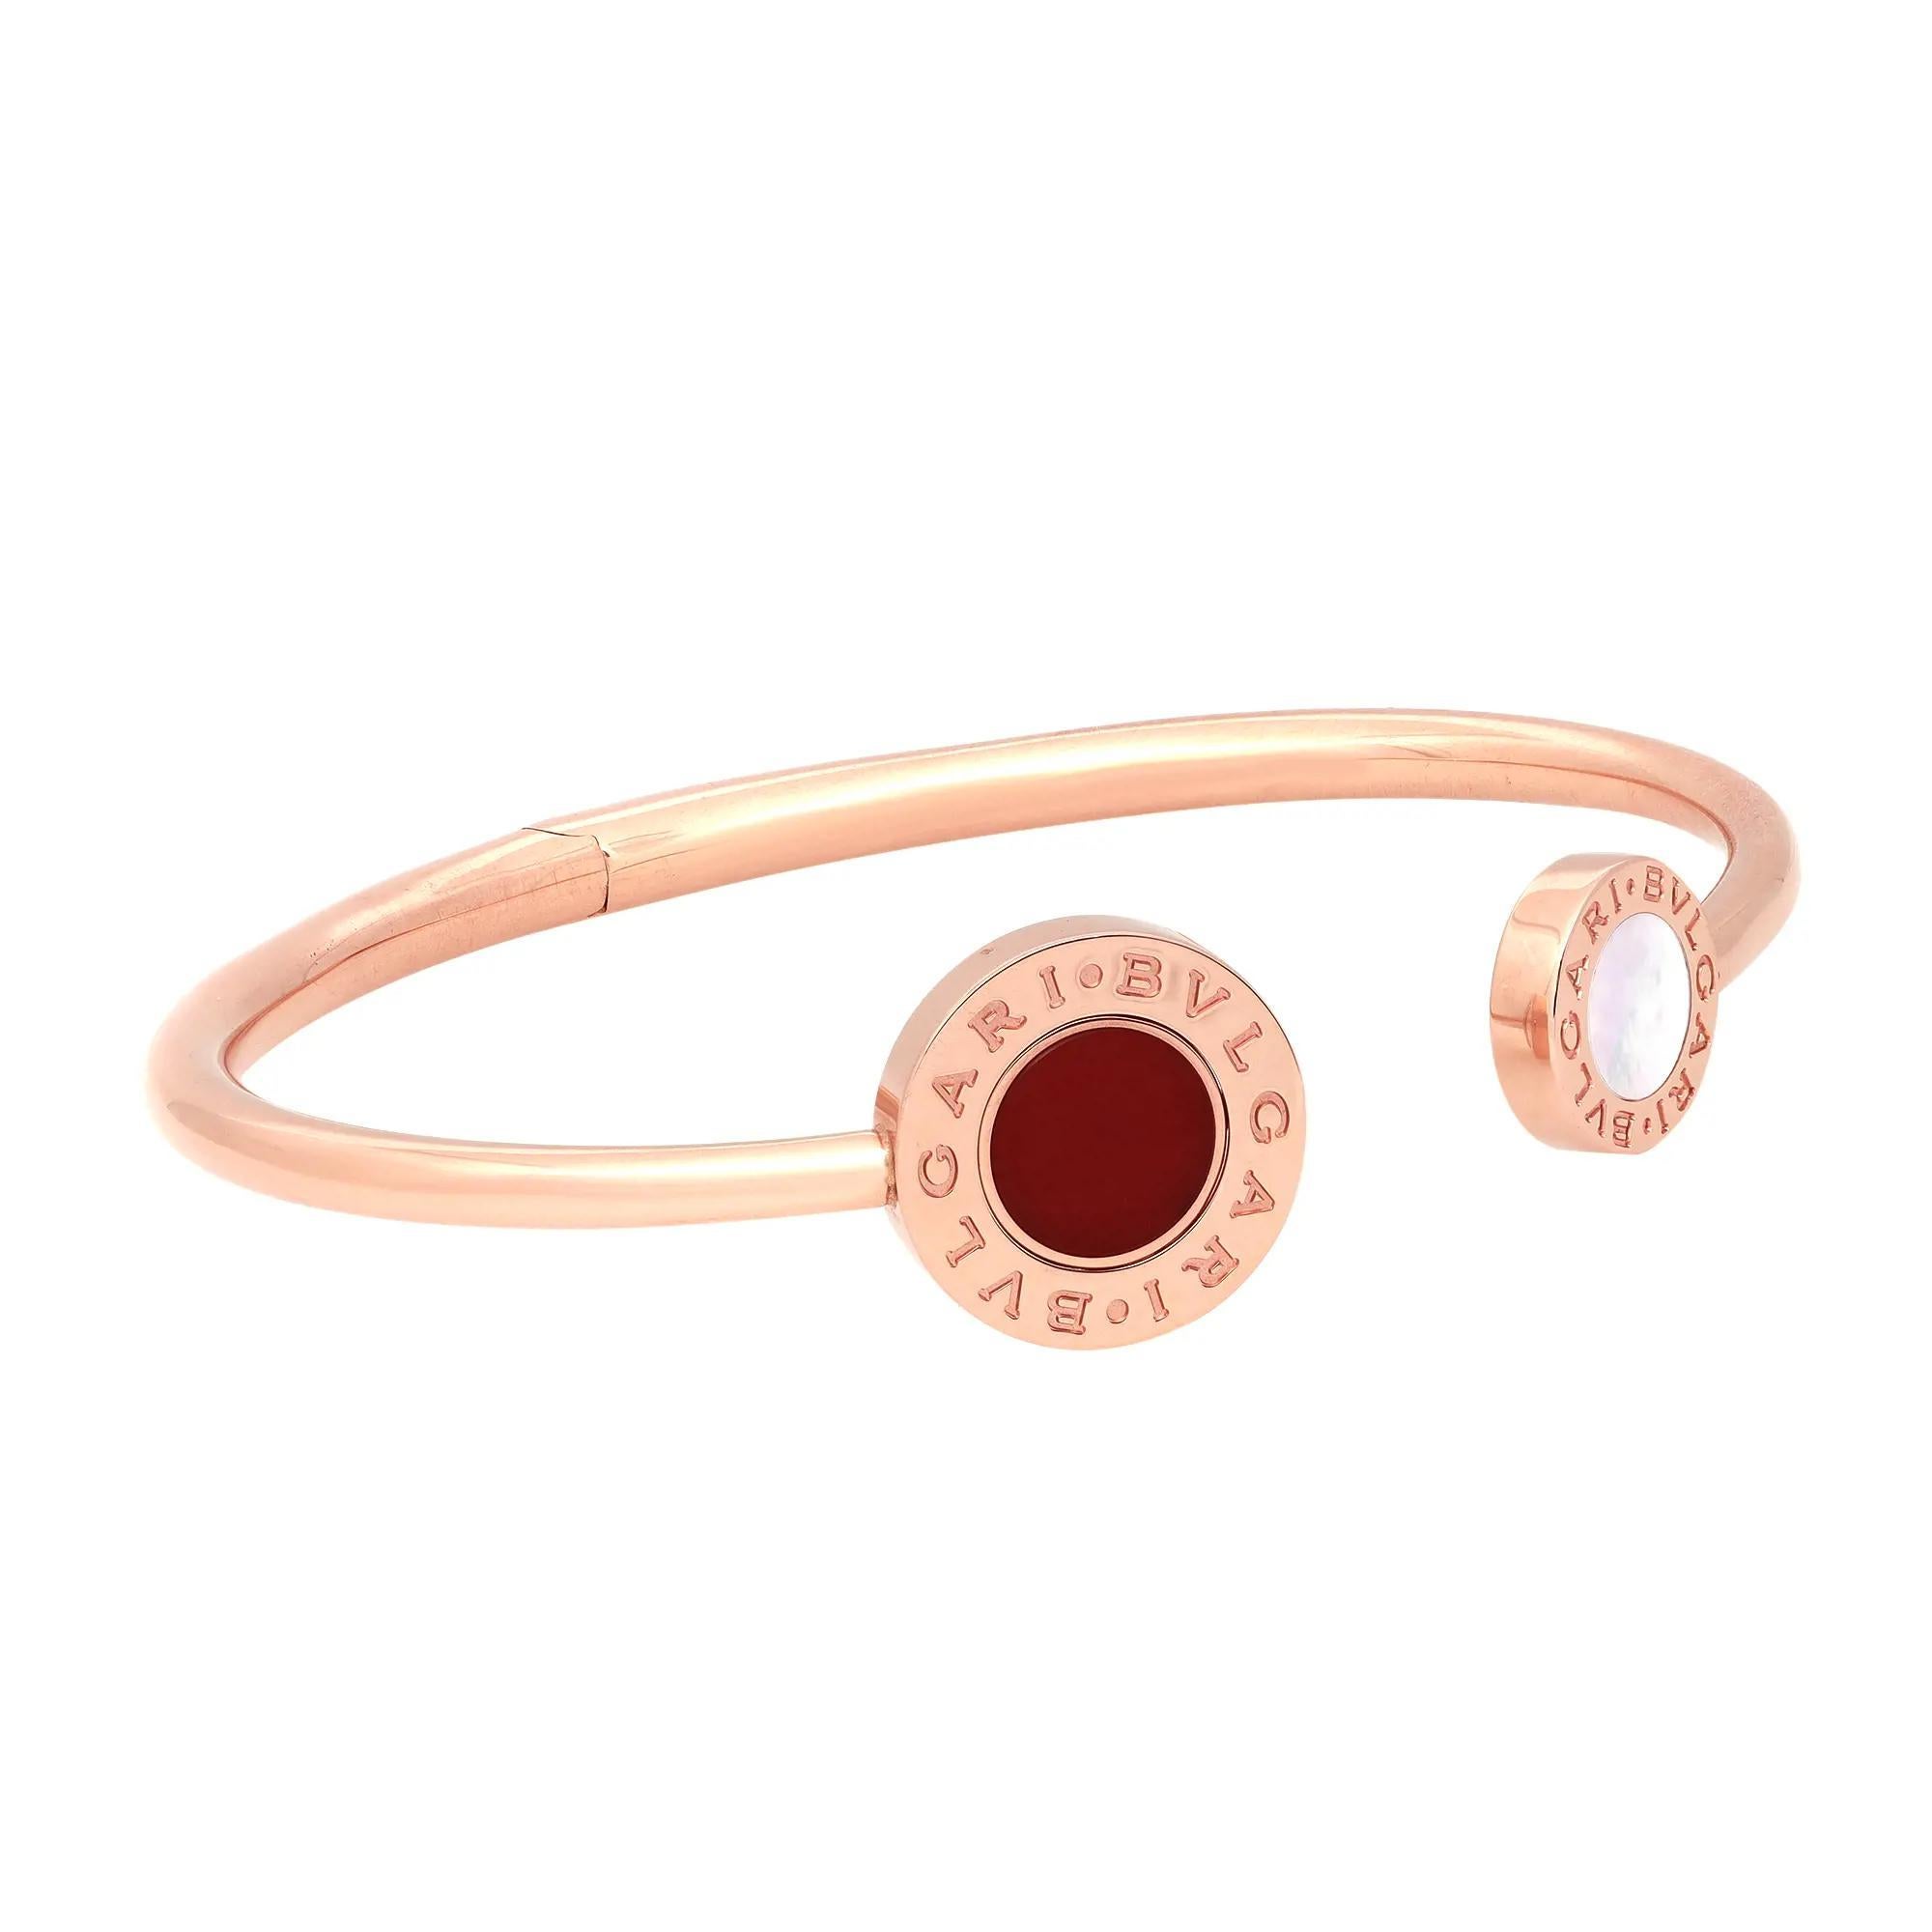 From the Bvlgari Classic Collection. An elegant fusion of culture and modernity, this chic flip hinged bracelet features double logo engraving, set with mother of pearl and a carnelian creating two different color options in one jewel. Crafted in